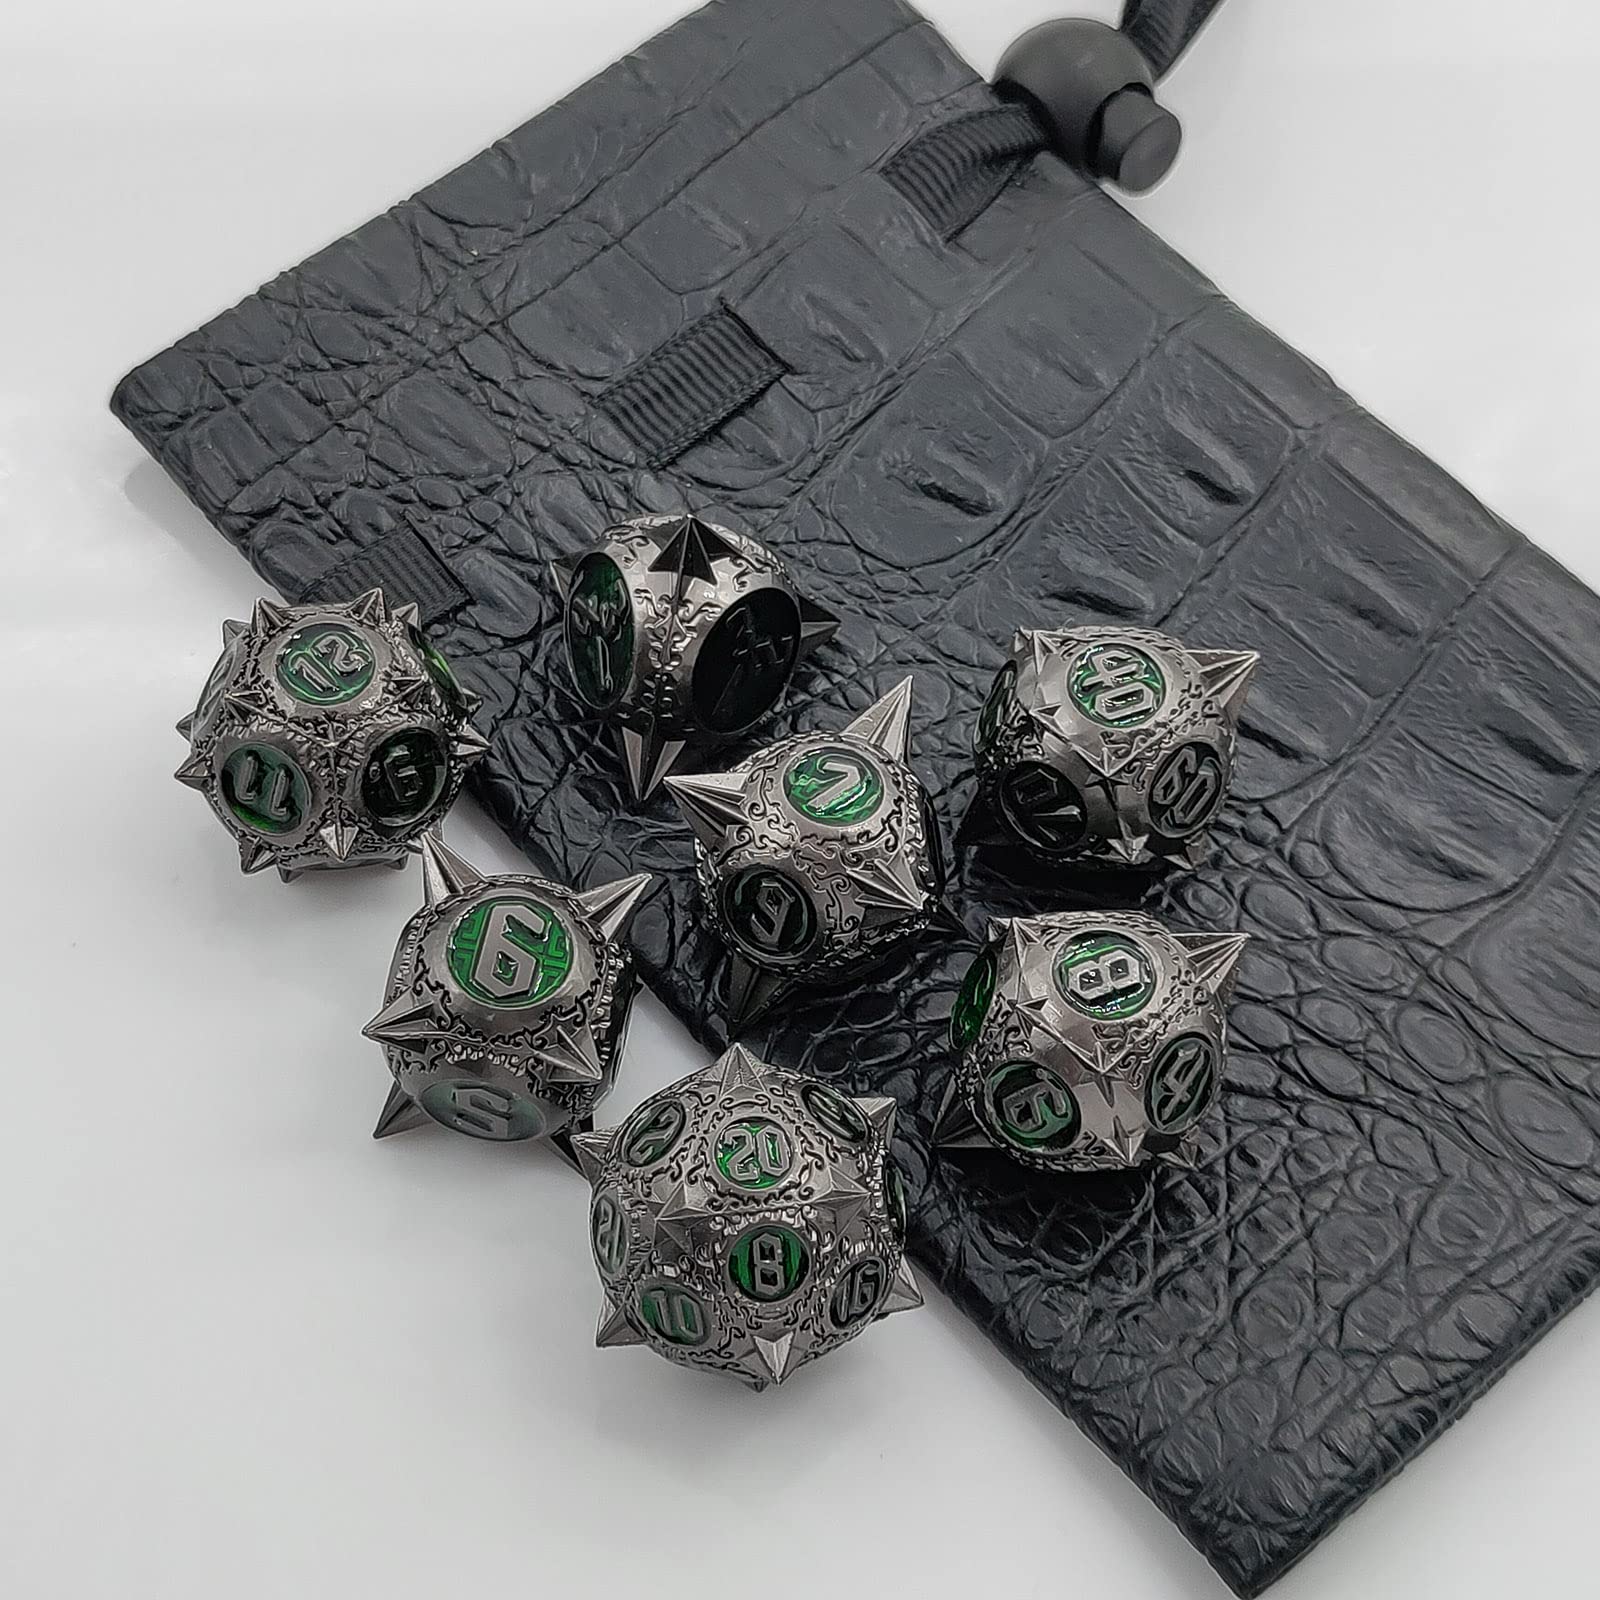 Metal DND Dice Set Dungeons and Dragons Dice Set with Dice Bag D and D Dice Set D&D Polyhedral Dice for Pathfinder MTG Warhammer RPG Role Playing Dice Game 6 Sided D20 D12 D10 D8 D6 D4